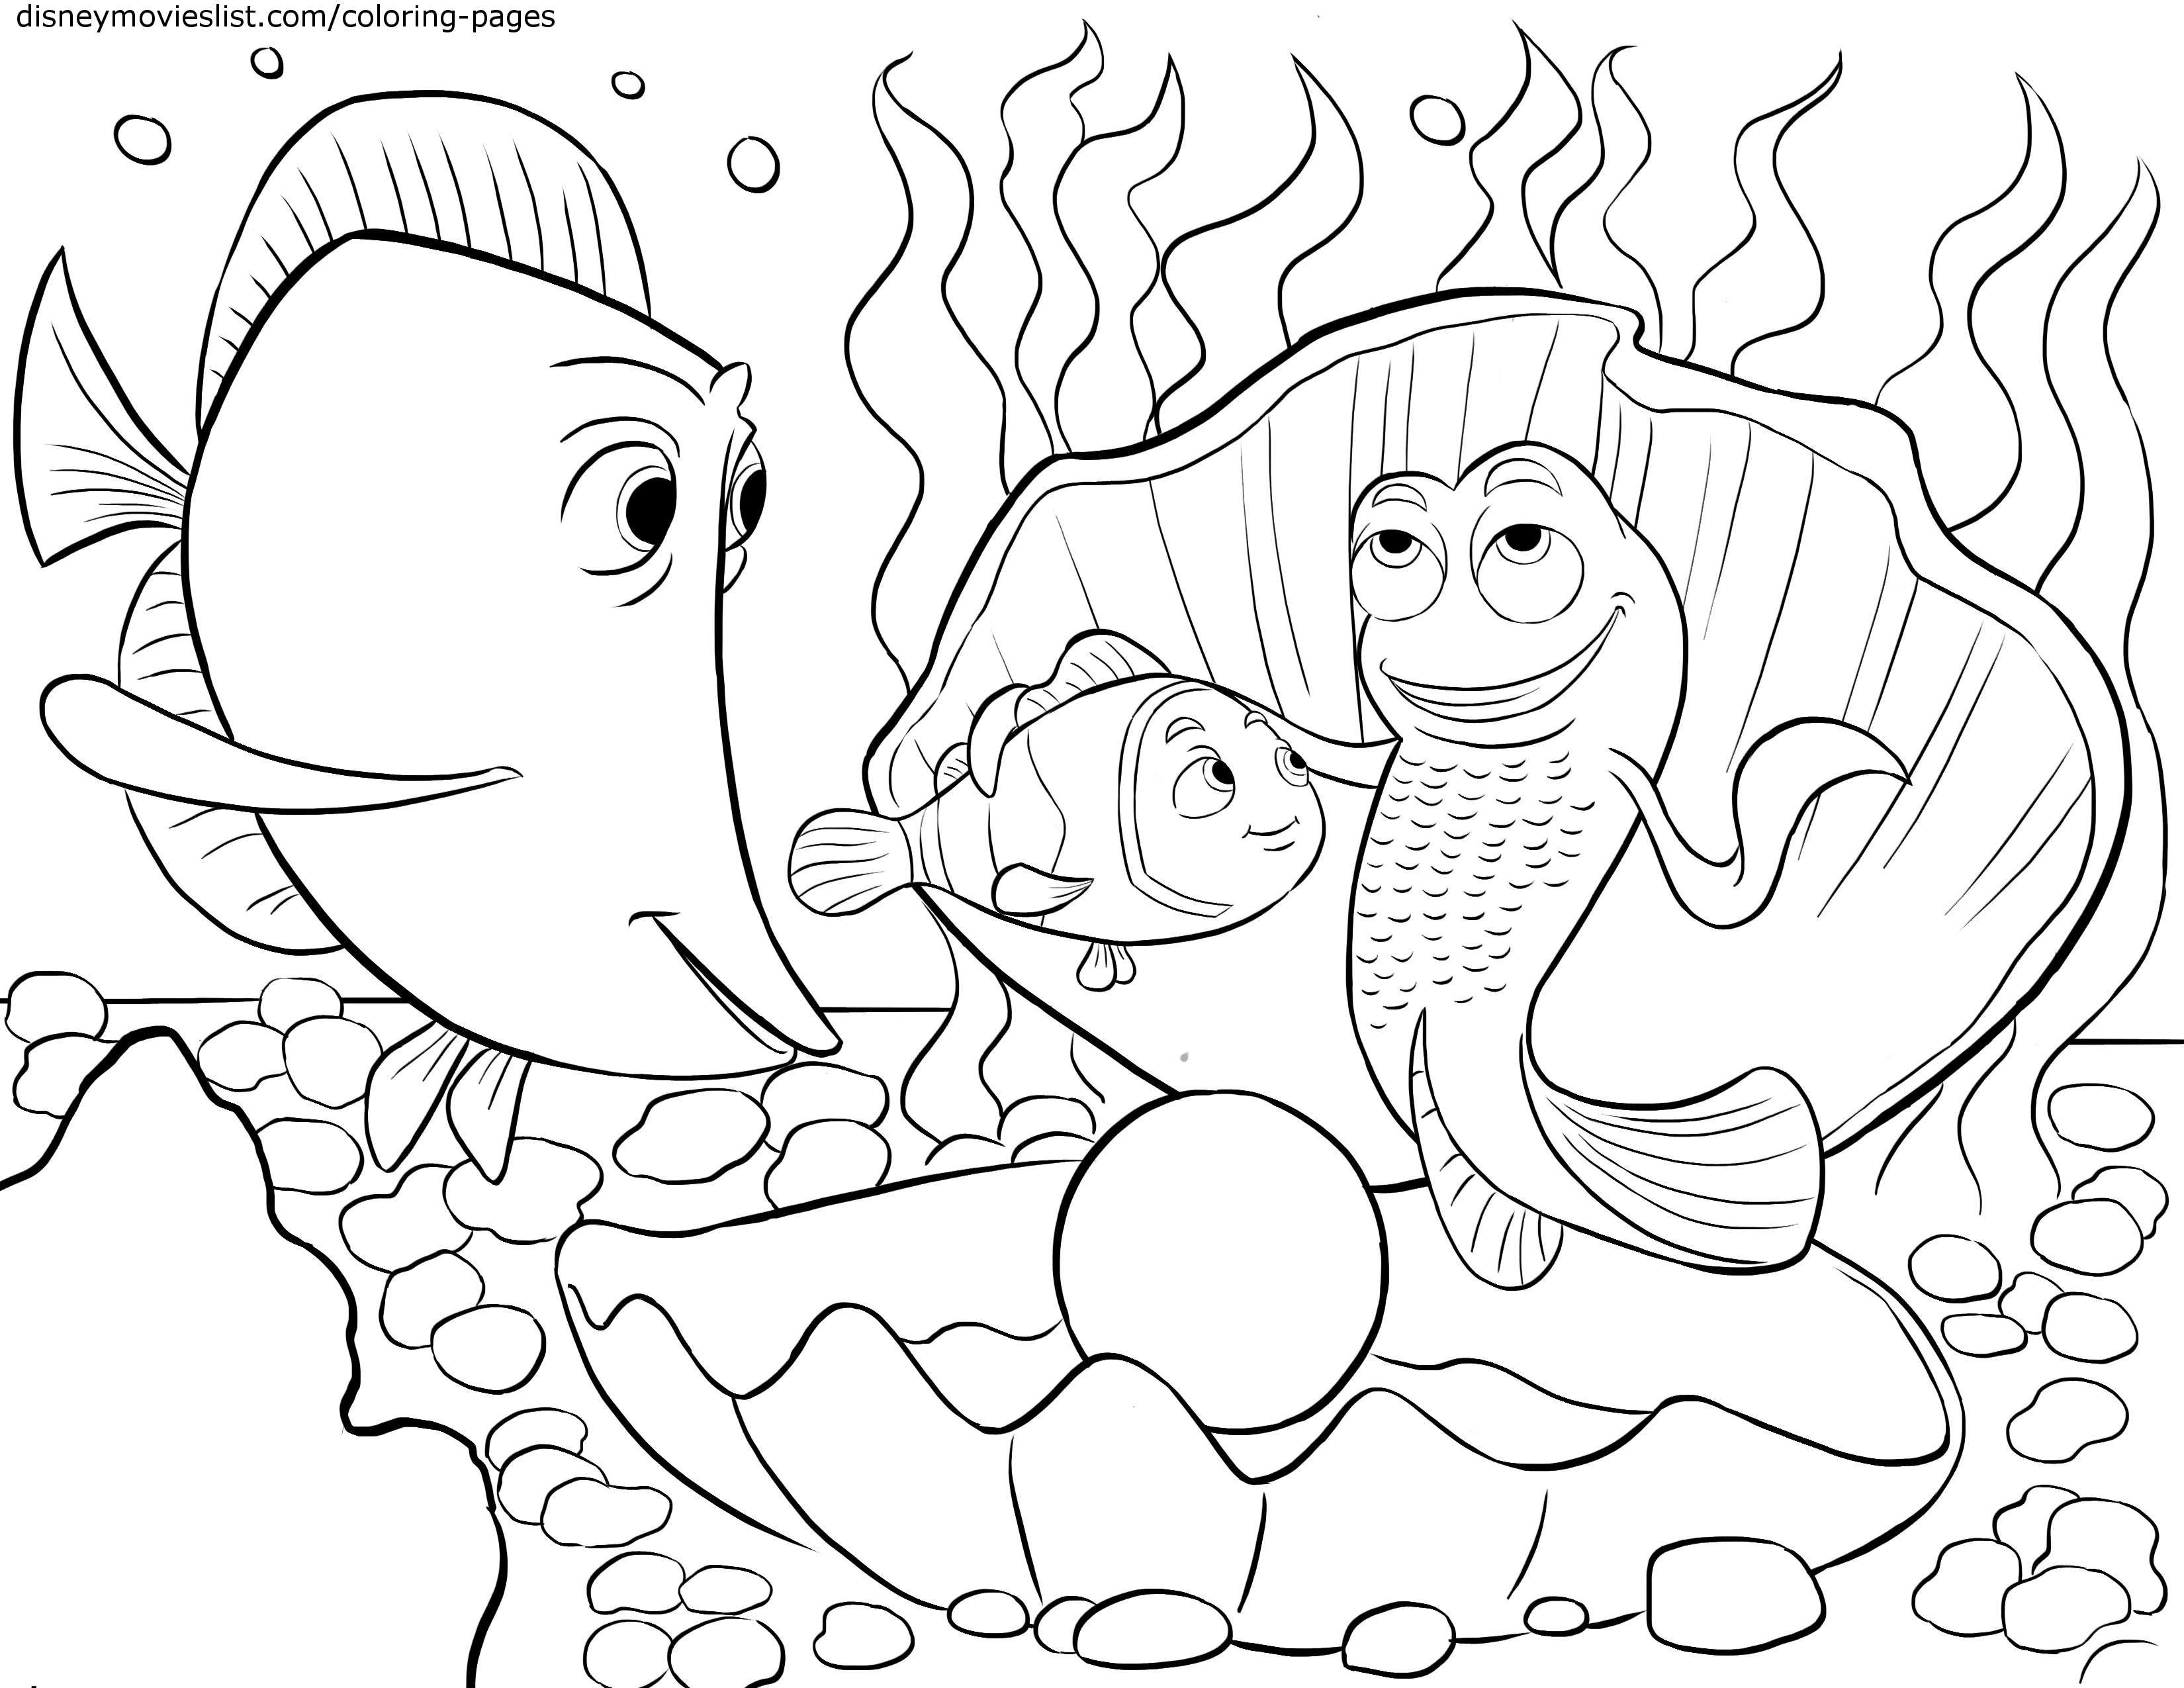 Download Disney's Finding Nemo Coloring Pages Sheet, Free Disney ...